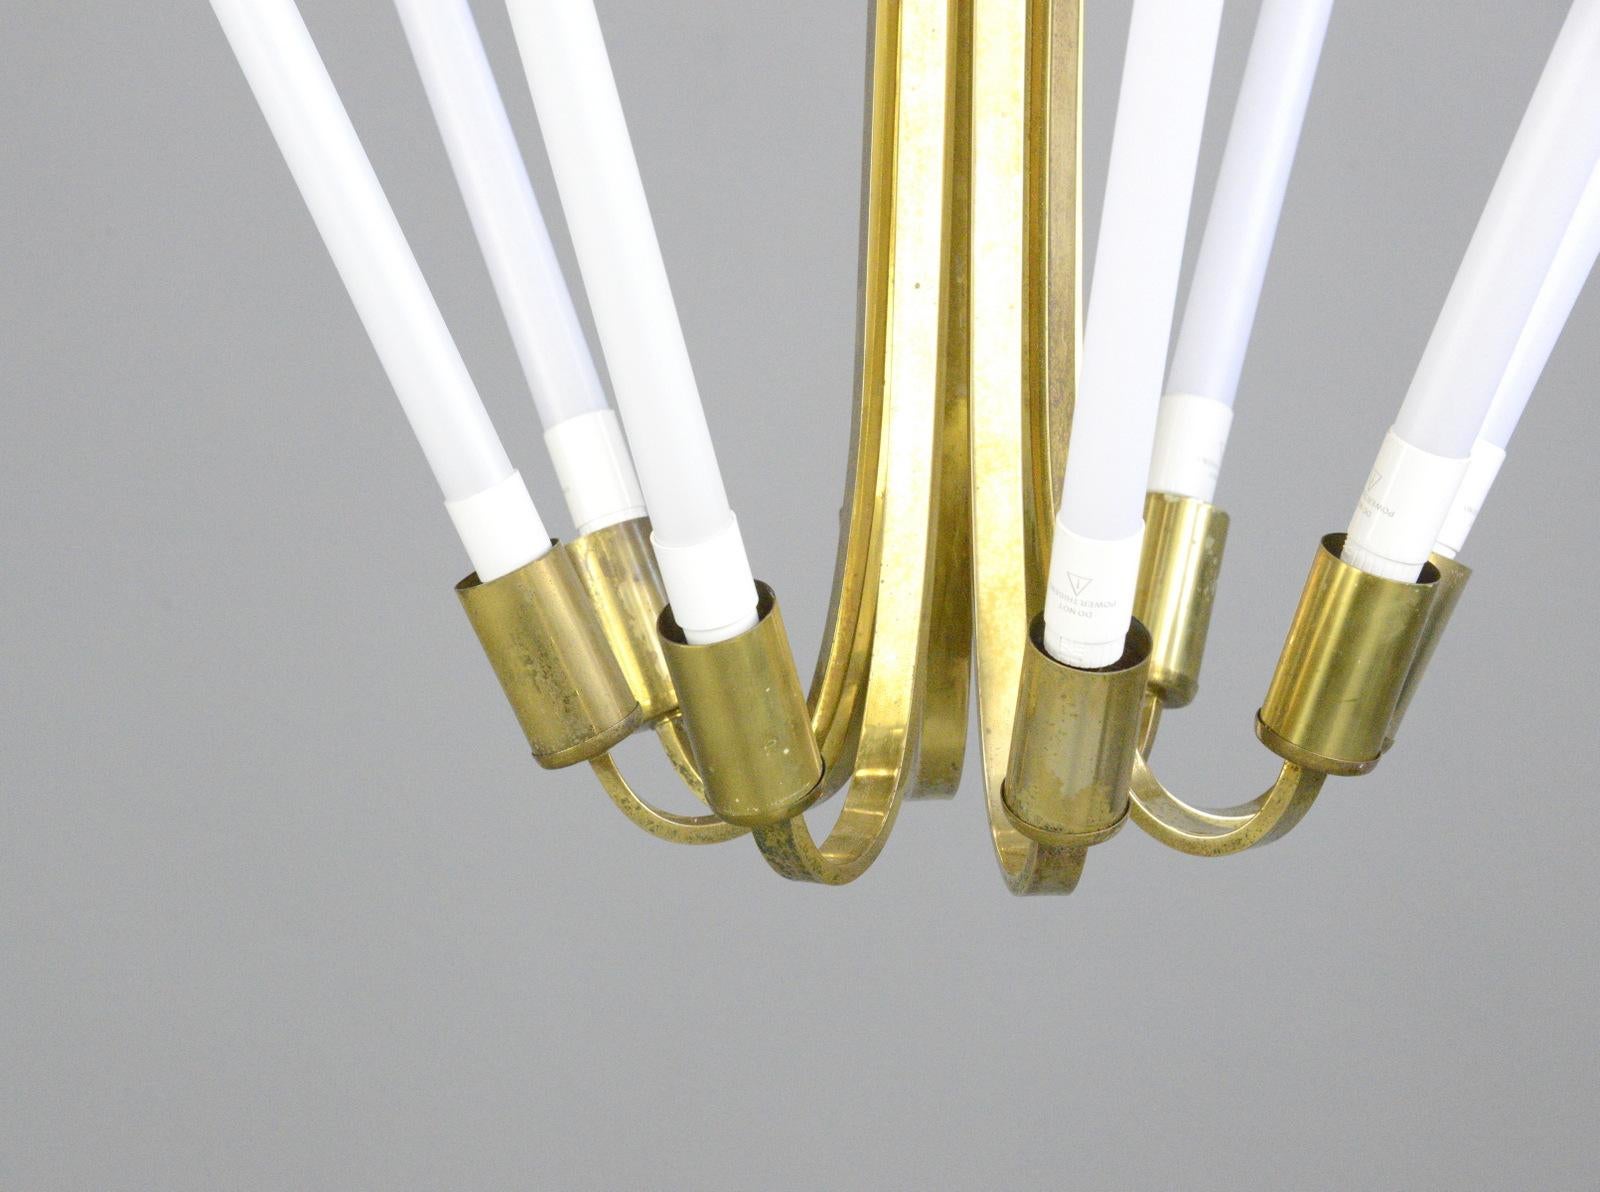 Large Bauhaus lobby chandelier, circa 1930s

- Sculptural curved brass
- Takes 8x LED tube bulbs
- Original designed to hang in cinema lobbies
- Made by Kaiser
- German, 1930s
- Measures: 70cm tall x 98cm wide

Condition report:

Fully re